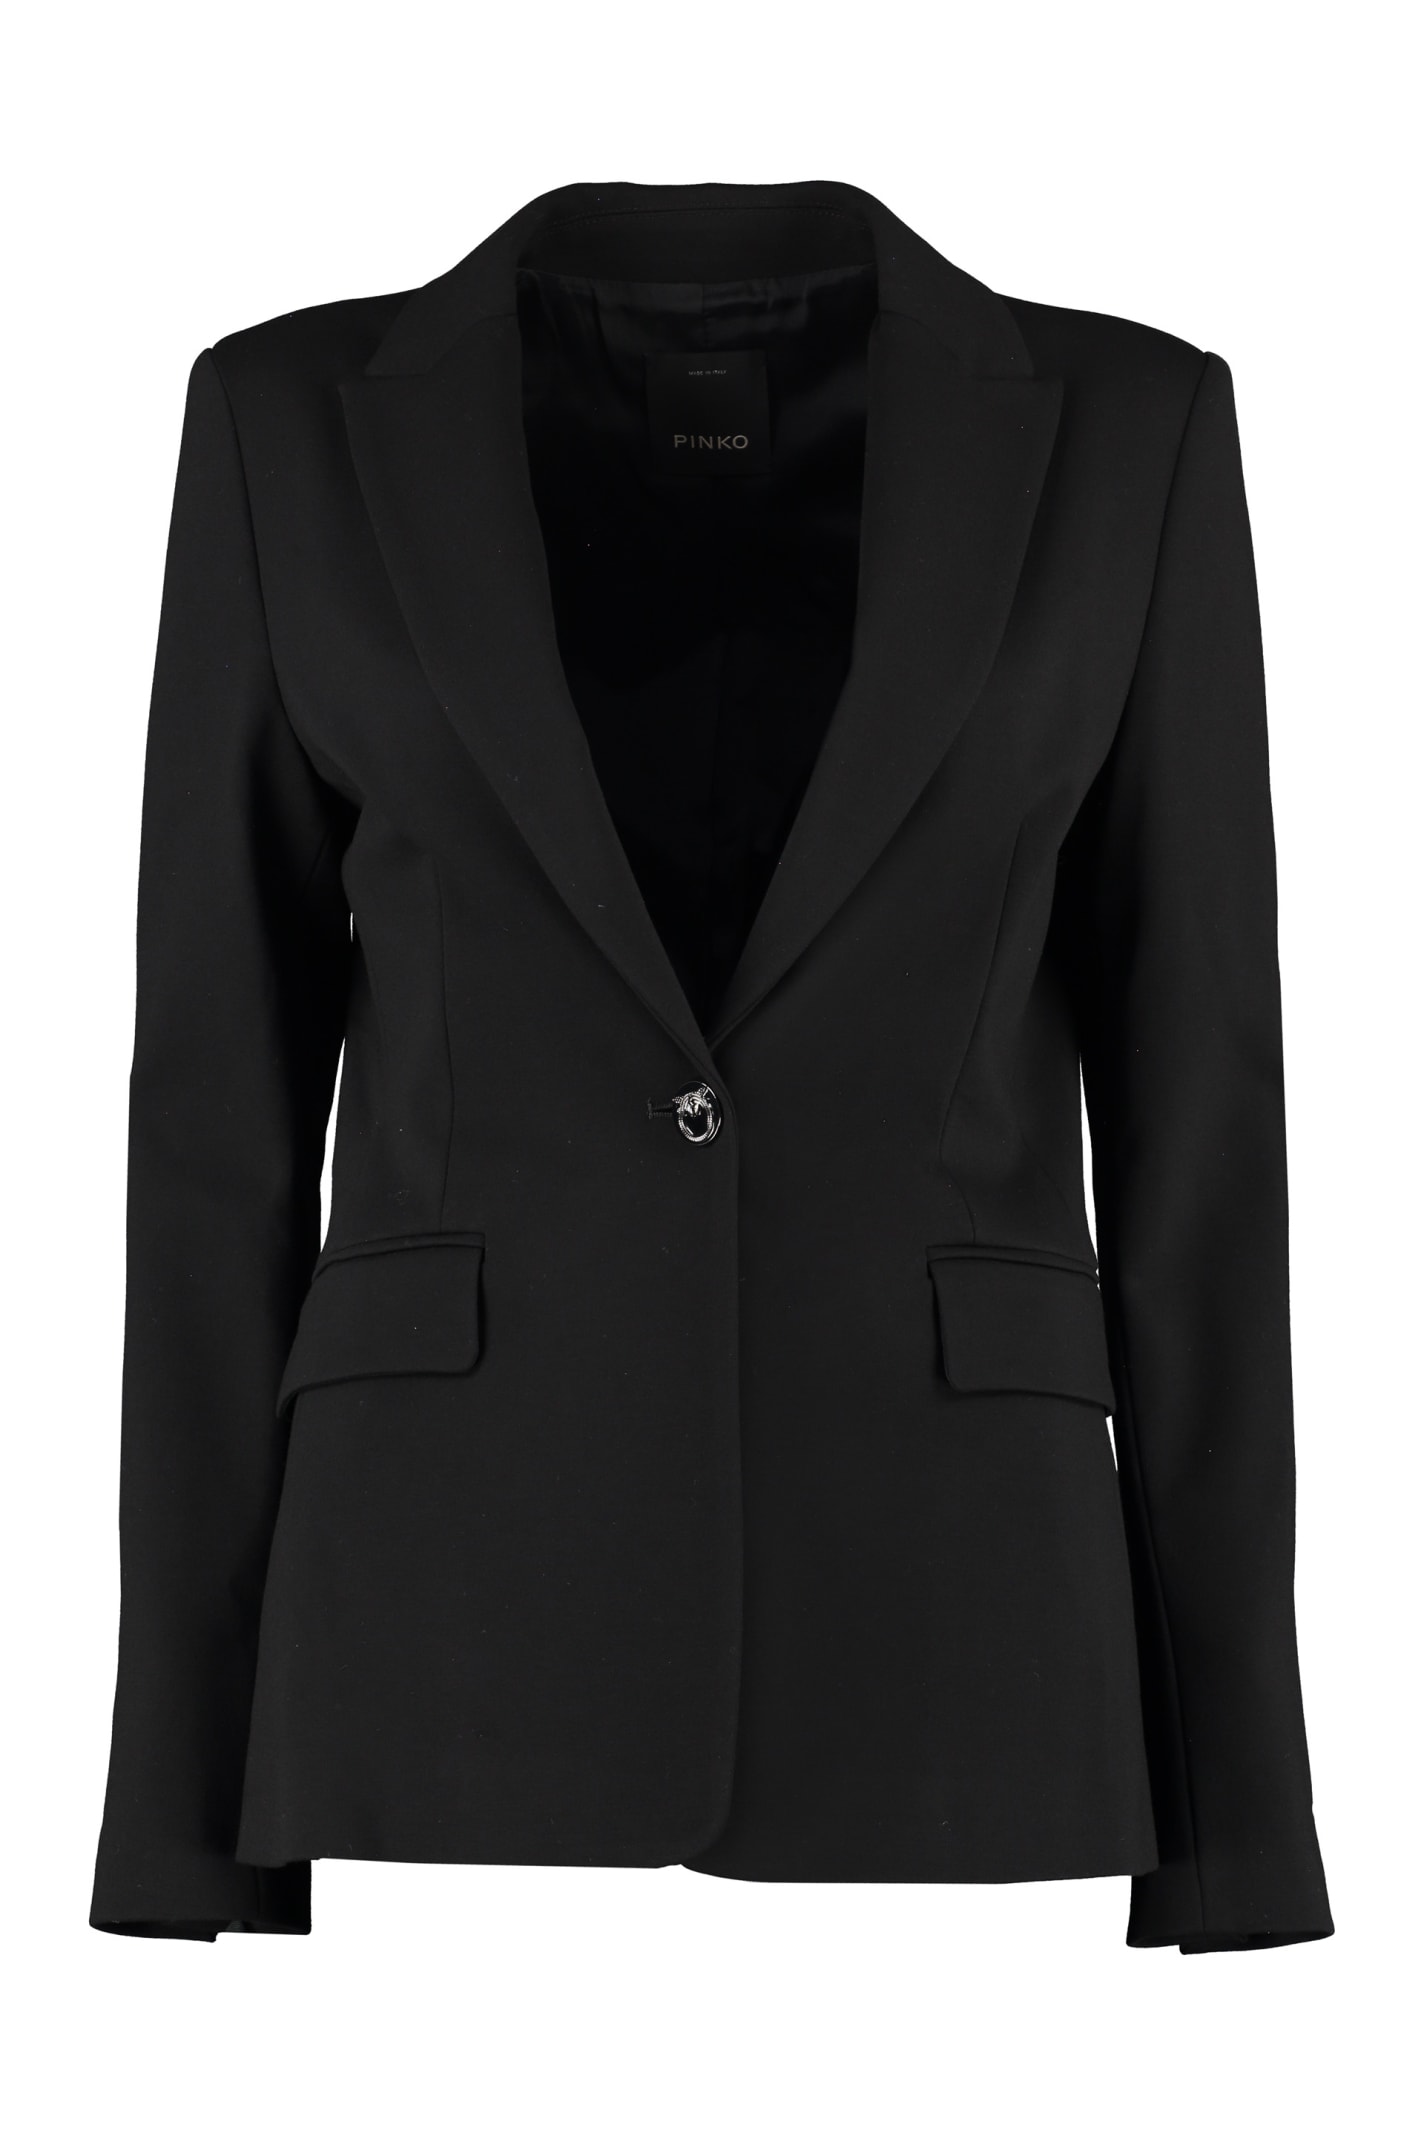 Pinko Signum Single-breasted One Button Jacket